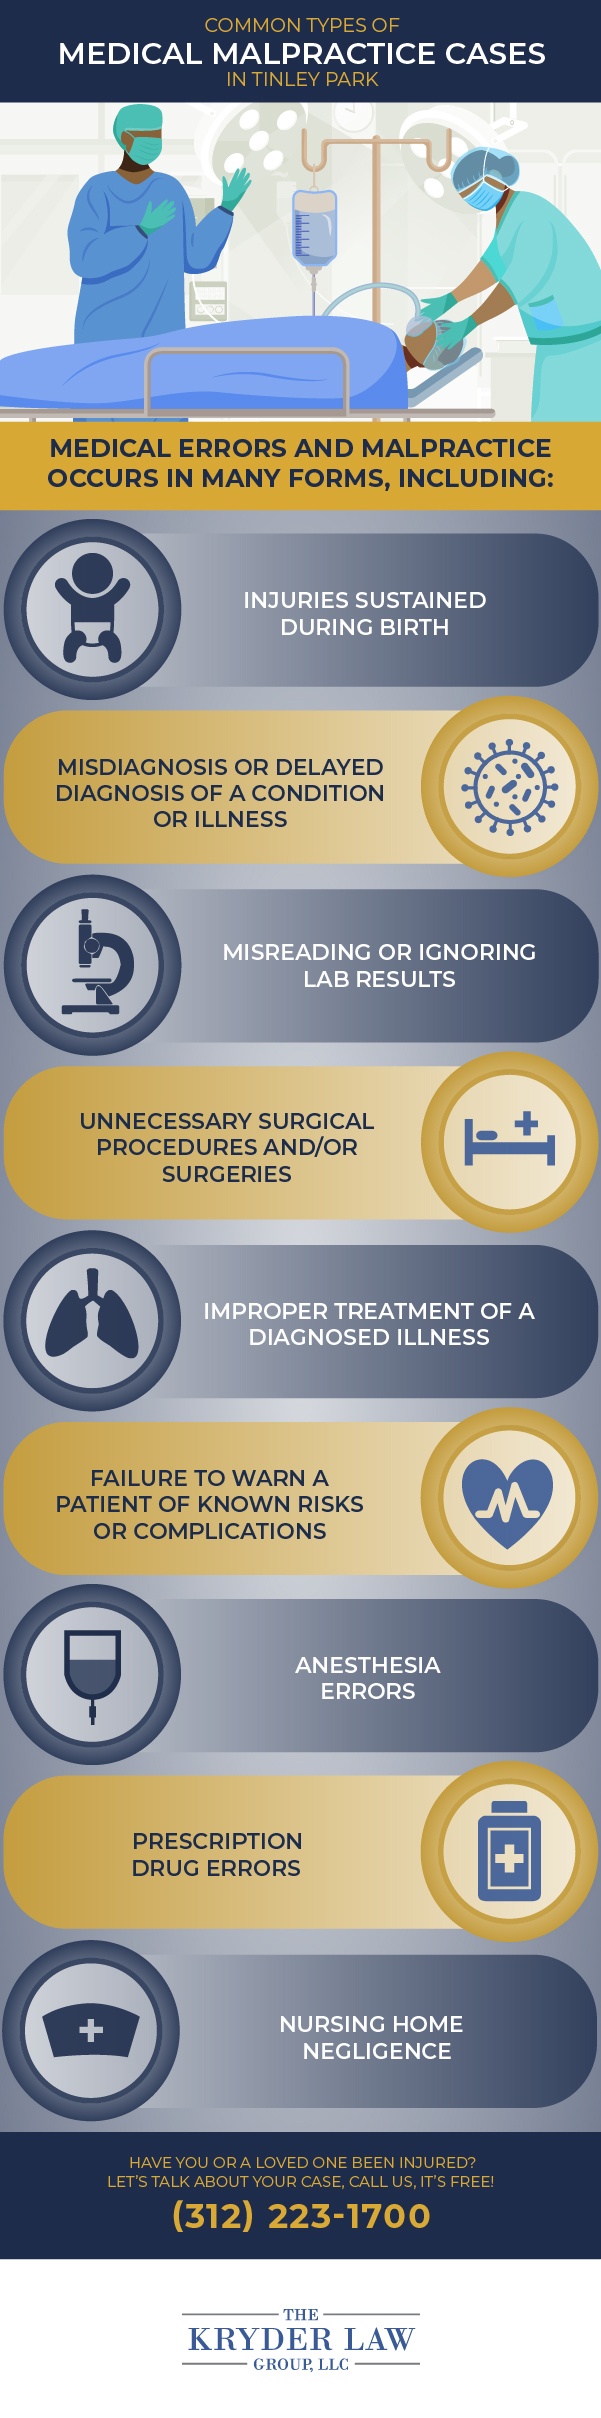 Common Types of Medical Malpractice in Tinley Park